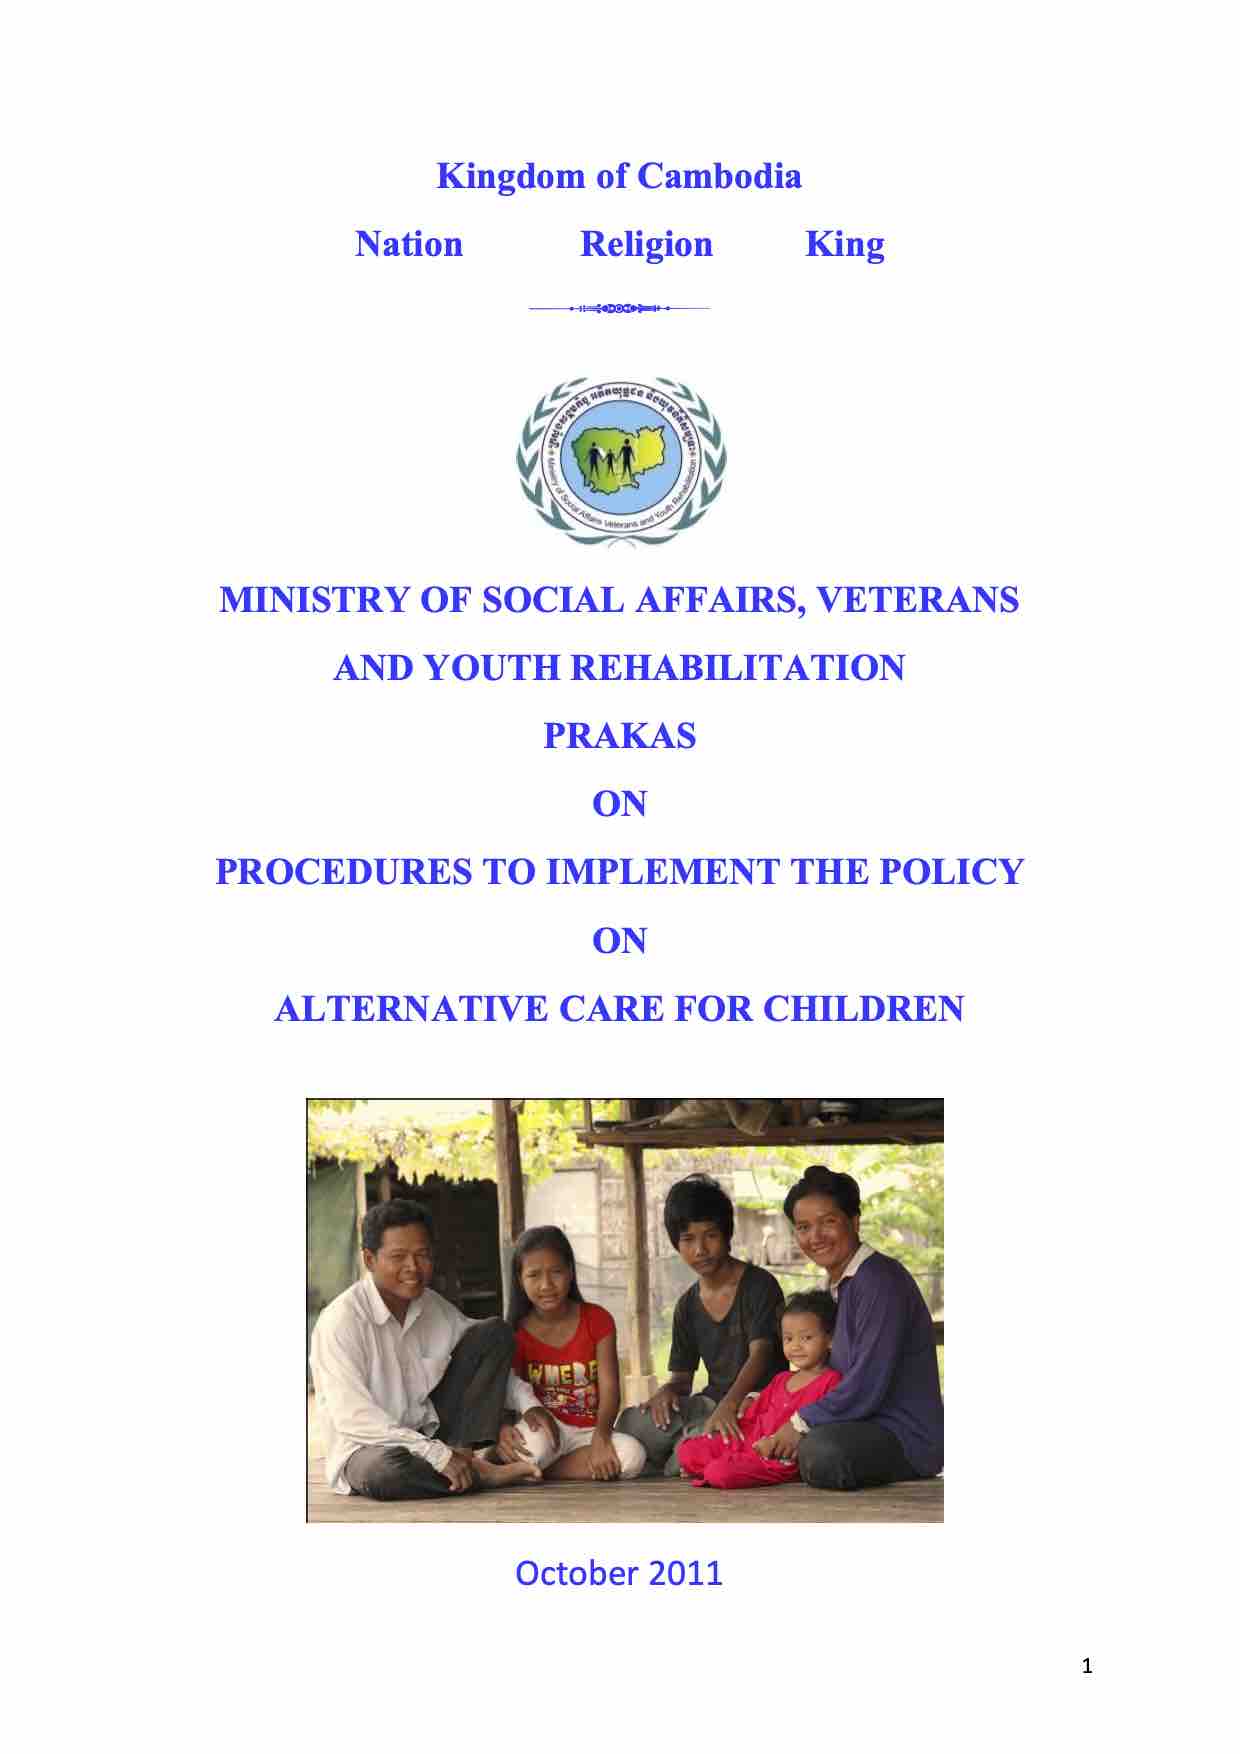 https://strongfamily.mosvy.gov.kh/wp-content/uploads/2019/10/Ministry-of-Social-Affairs-1-Prakas-on-Procedures-to-Implement-the-Policy-on-Alternative-Care-for-Children.jpg